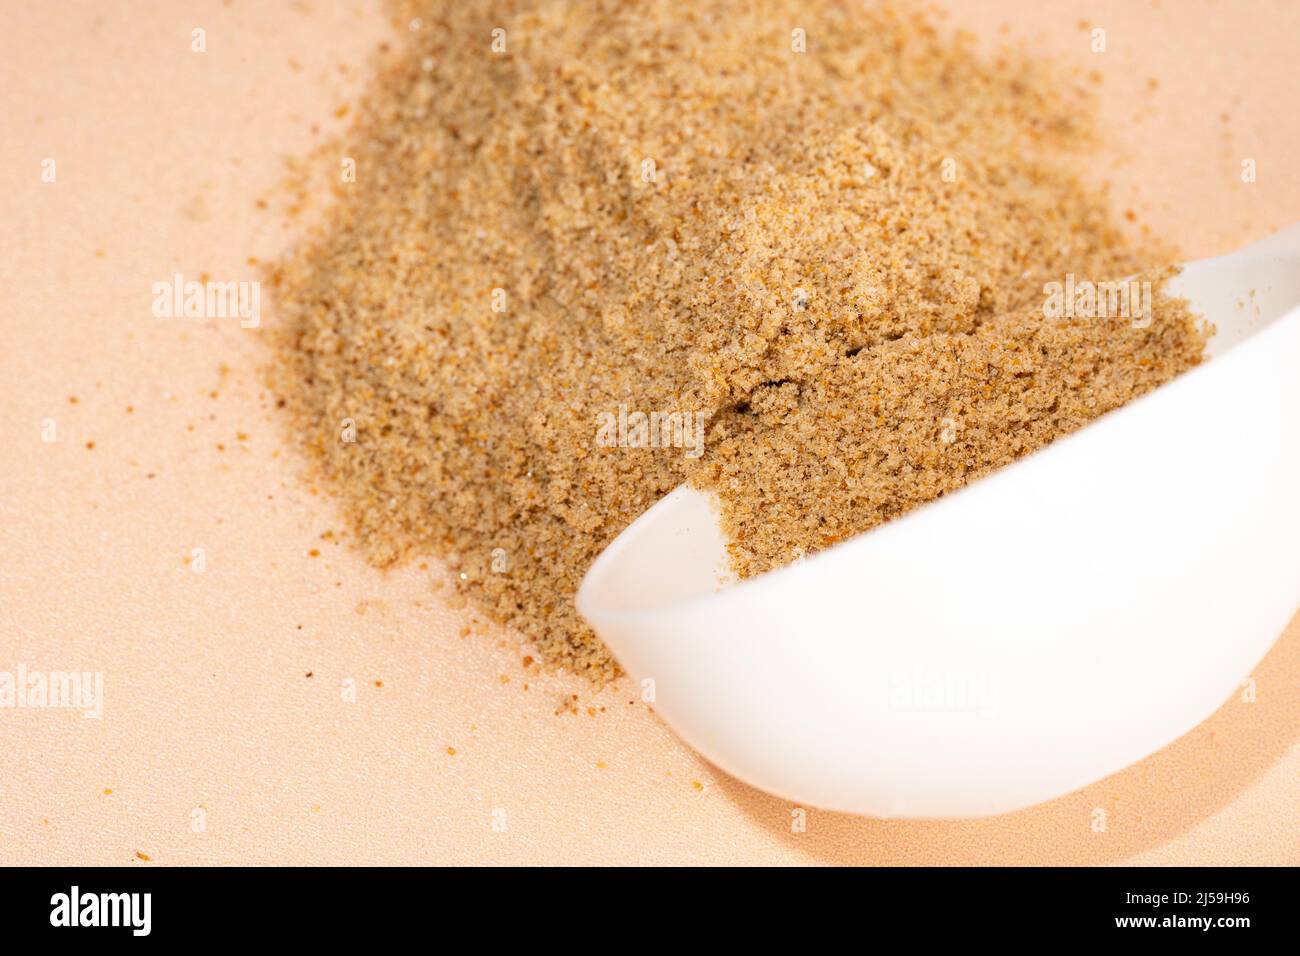 Mixture of dietary supplements. White can of dietary fiber and scoop on a beige background. Dietary herbal supplements, biologically active additives Stock Photo